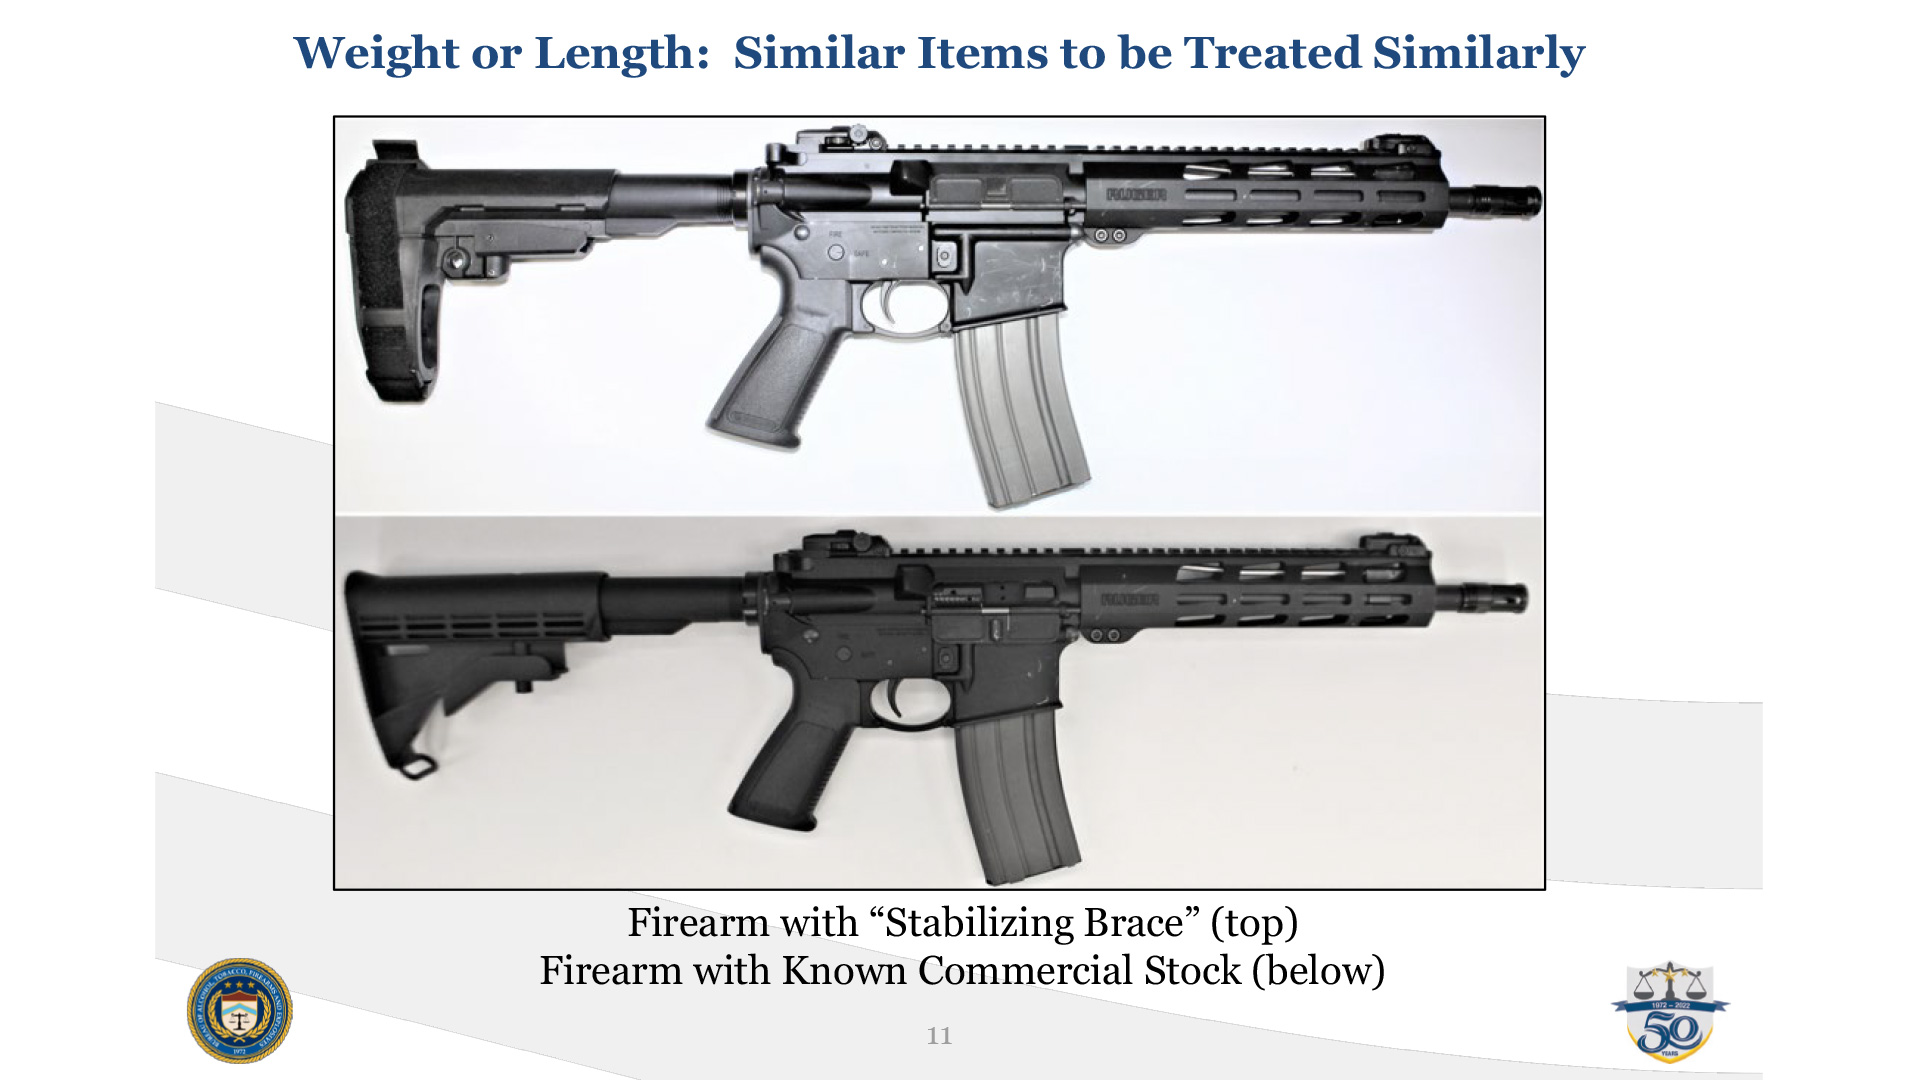 Pistols With 'Stabilizing Braces' Are Now NFA Short-Barreled Rifles